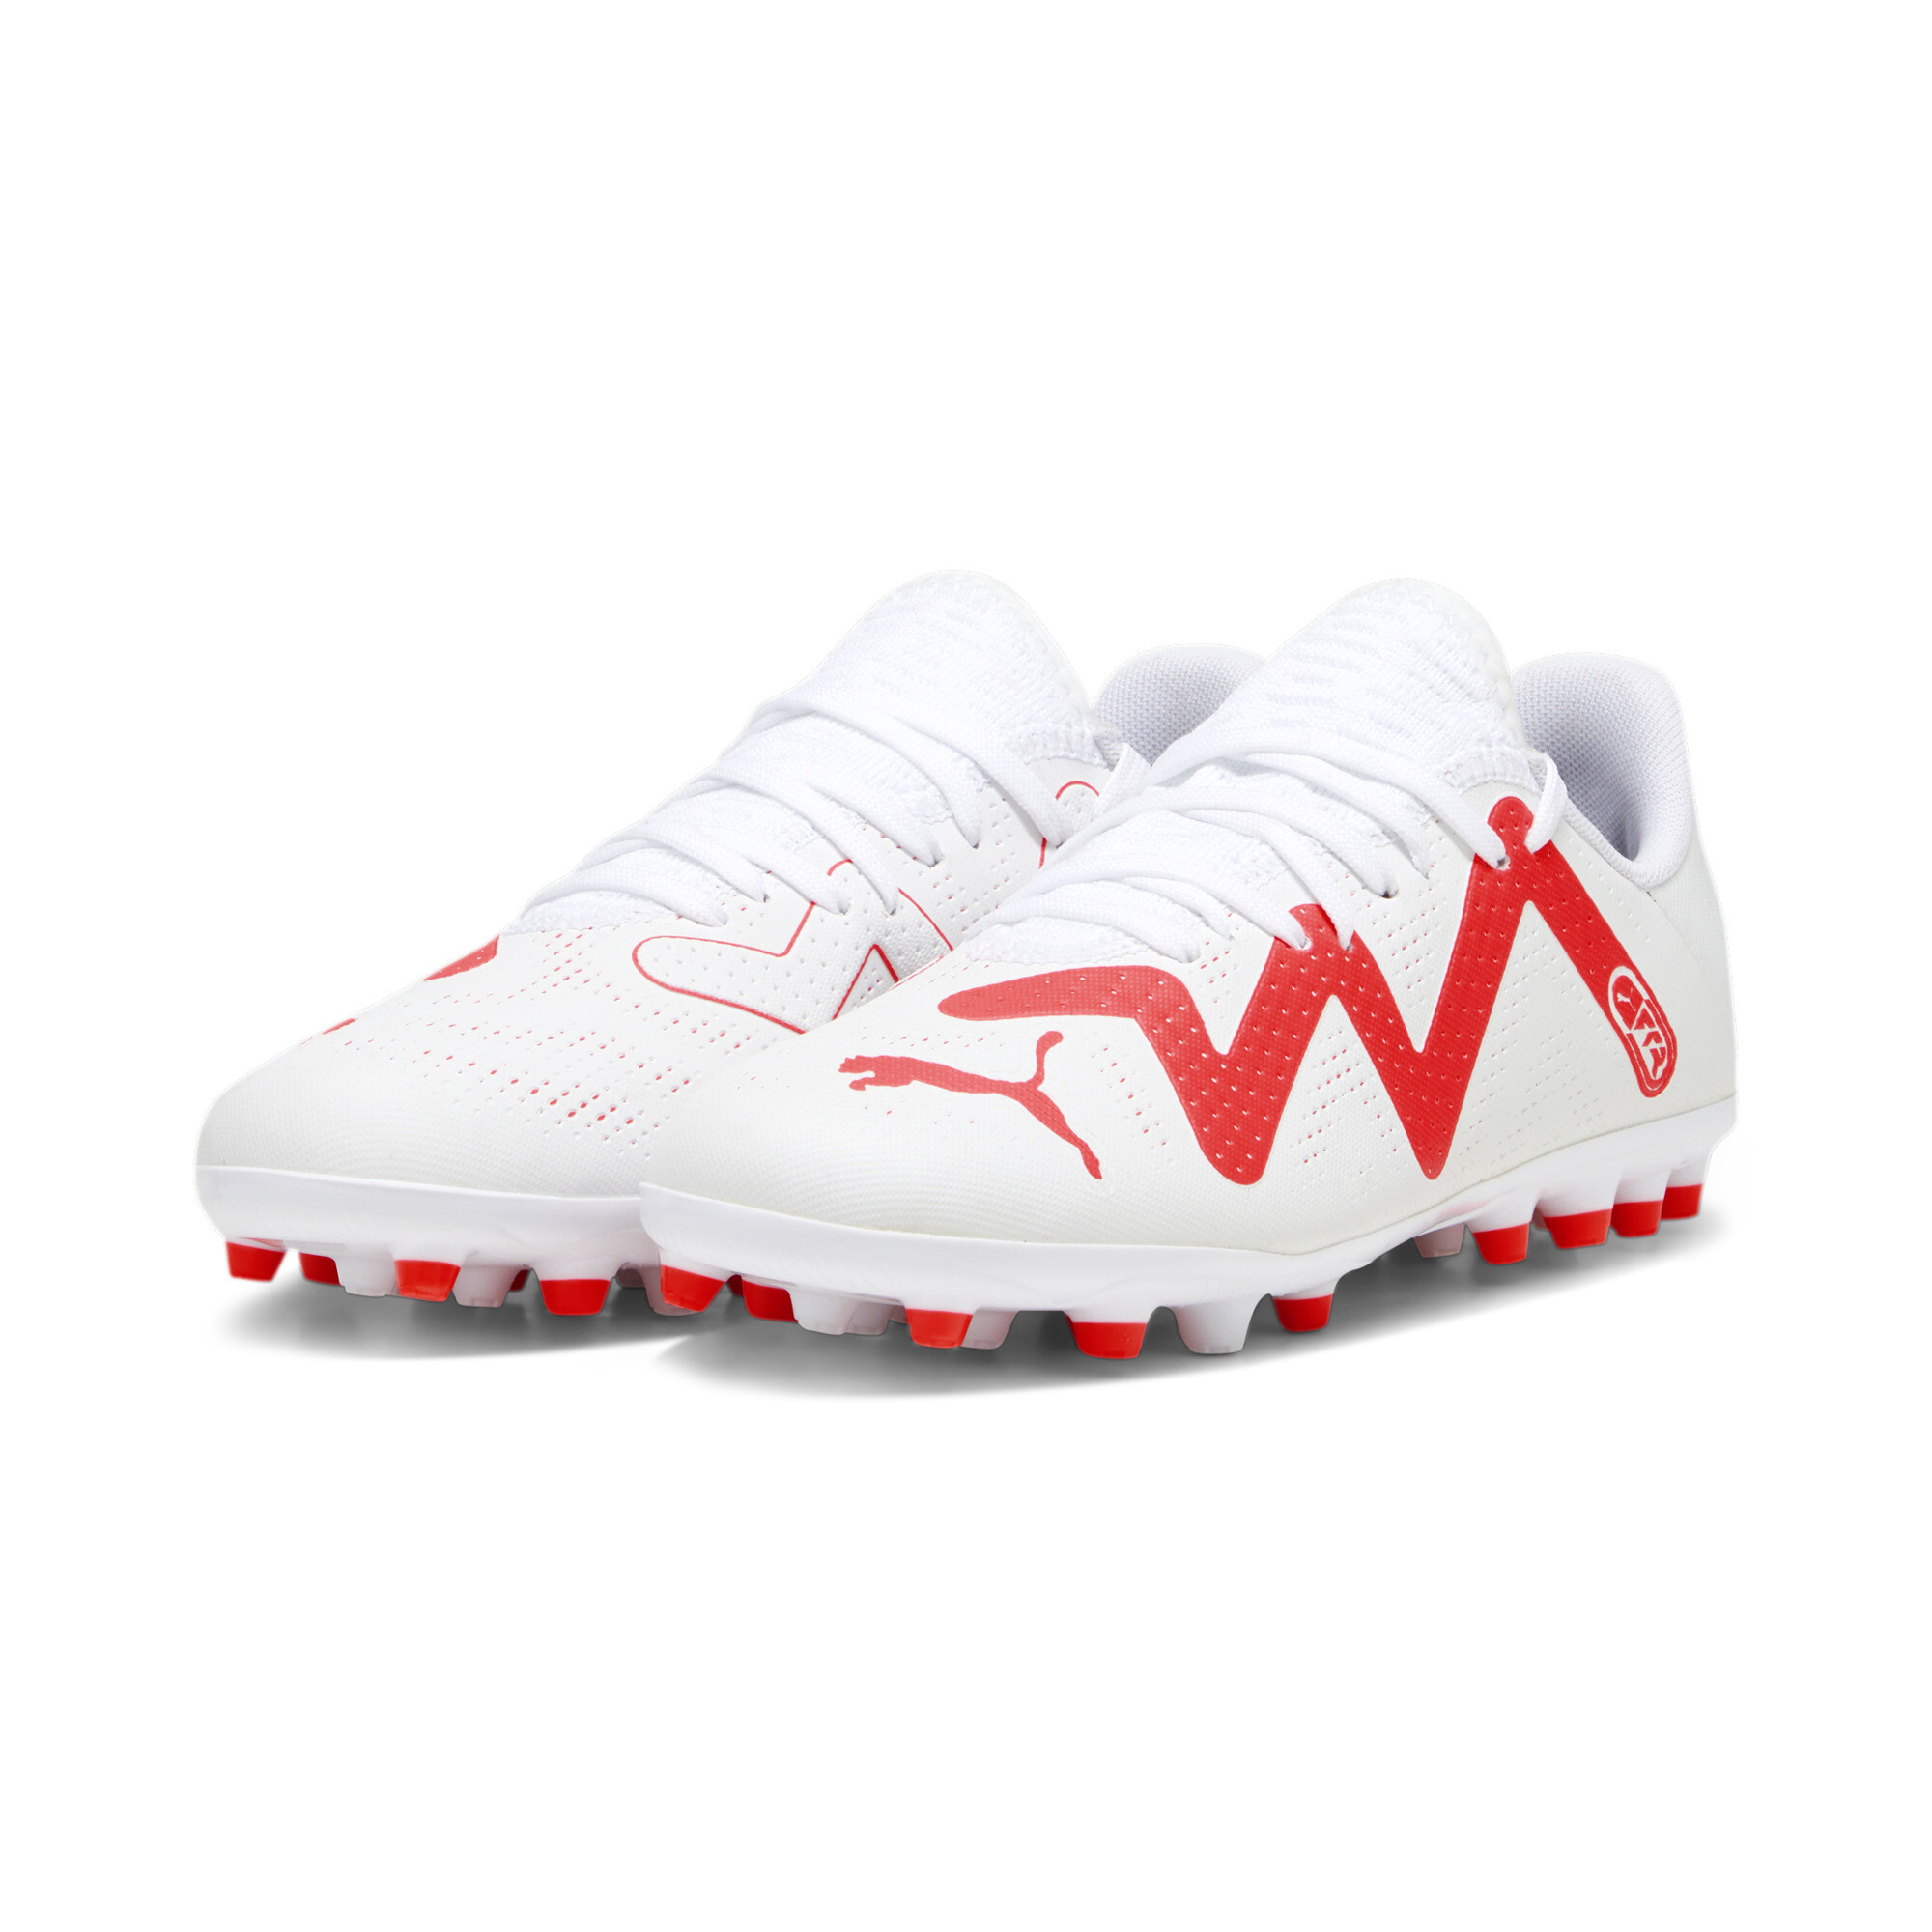 Puma FUTURE PLAY MG Youth Football Boots, White, Size 33, Shoes